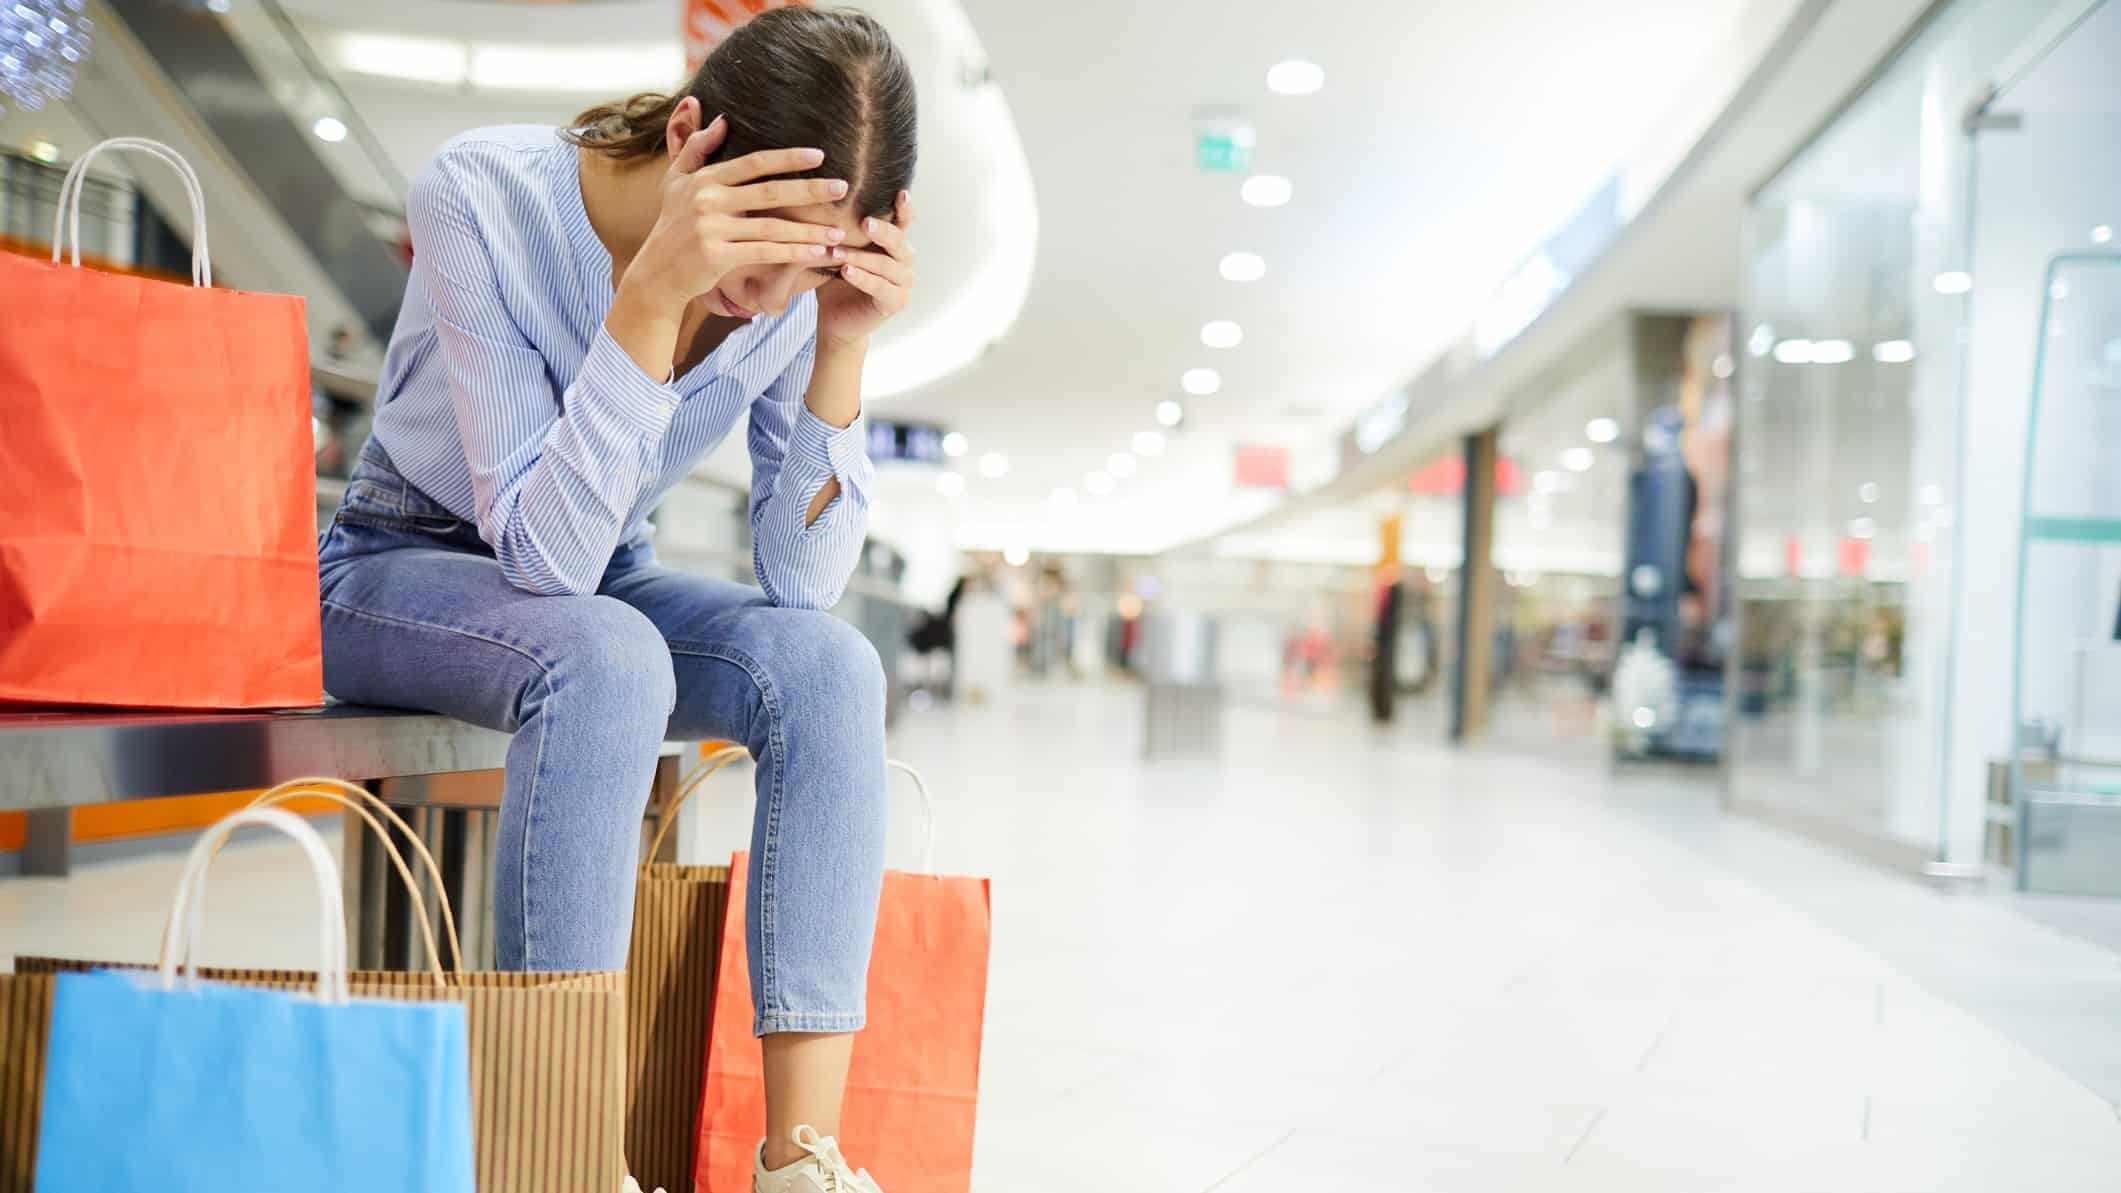 Falling asx retail share price represented by sad shopper sitting in mall